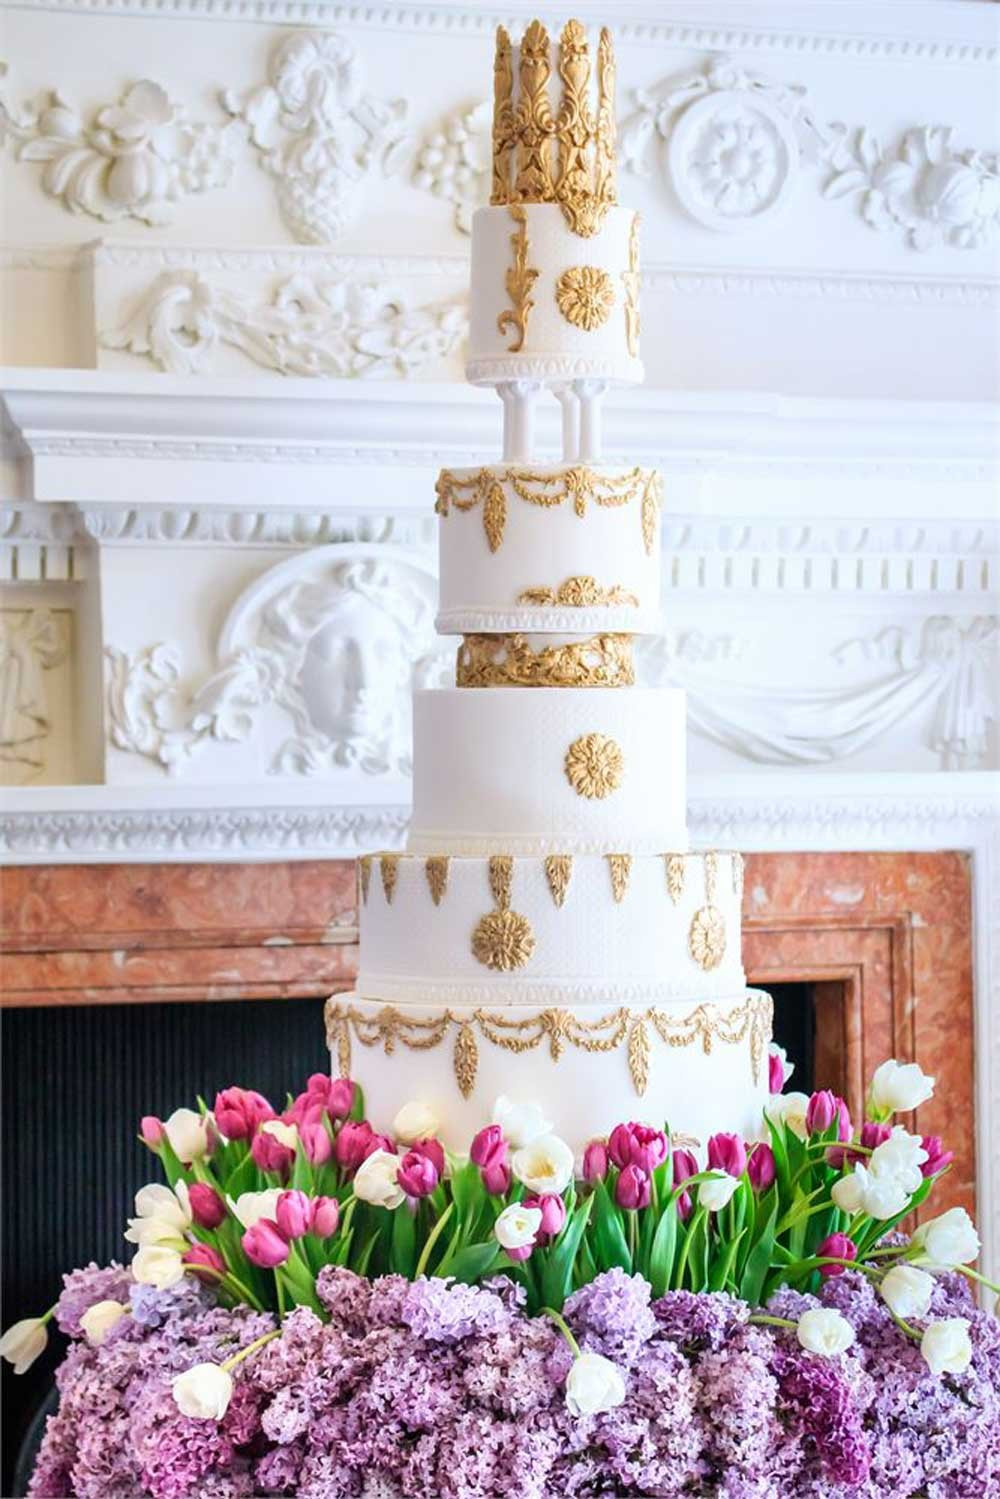 Price Of Wedding Cakes
 Wedding Cake Prices Guide for bud s from £100 to over £